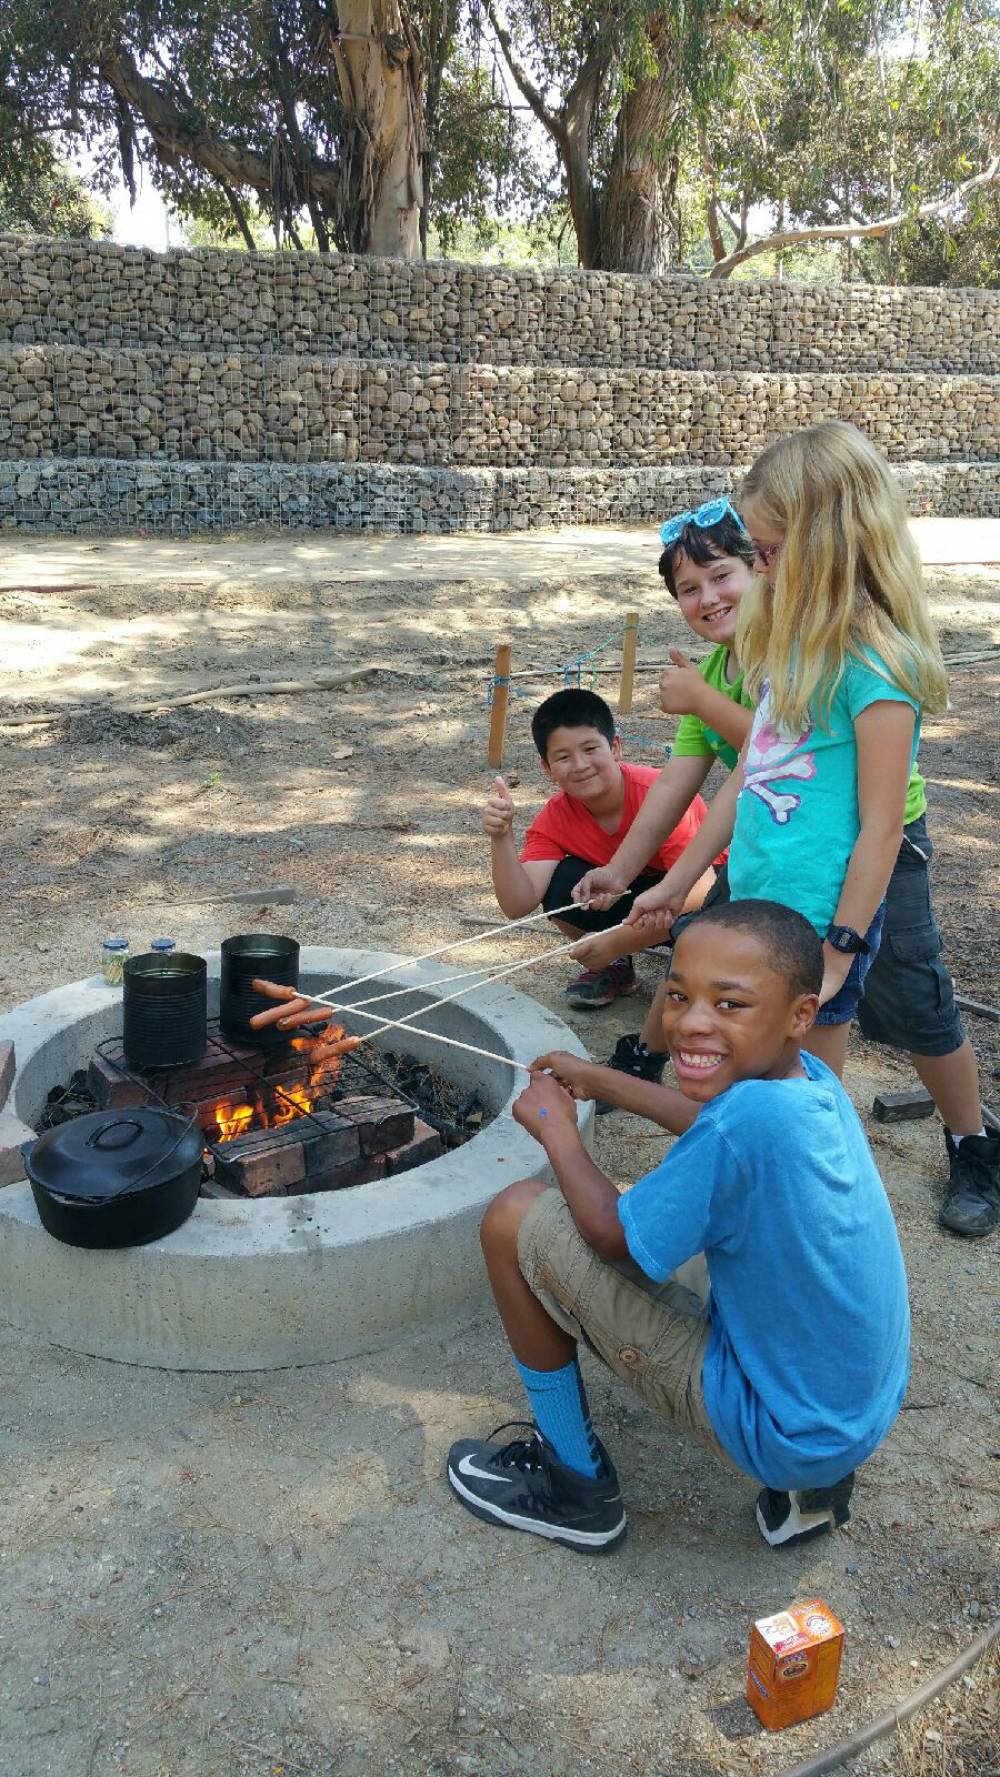 TOP CALIFORNIA SUMMER CAMP: Backyard Bunch is a Top Summer Camp located in Long Beach California offering many fun and enriching camp programs. 